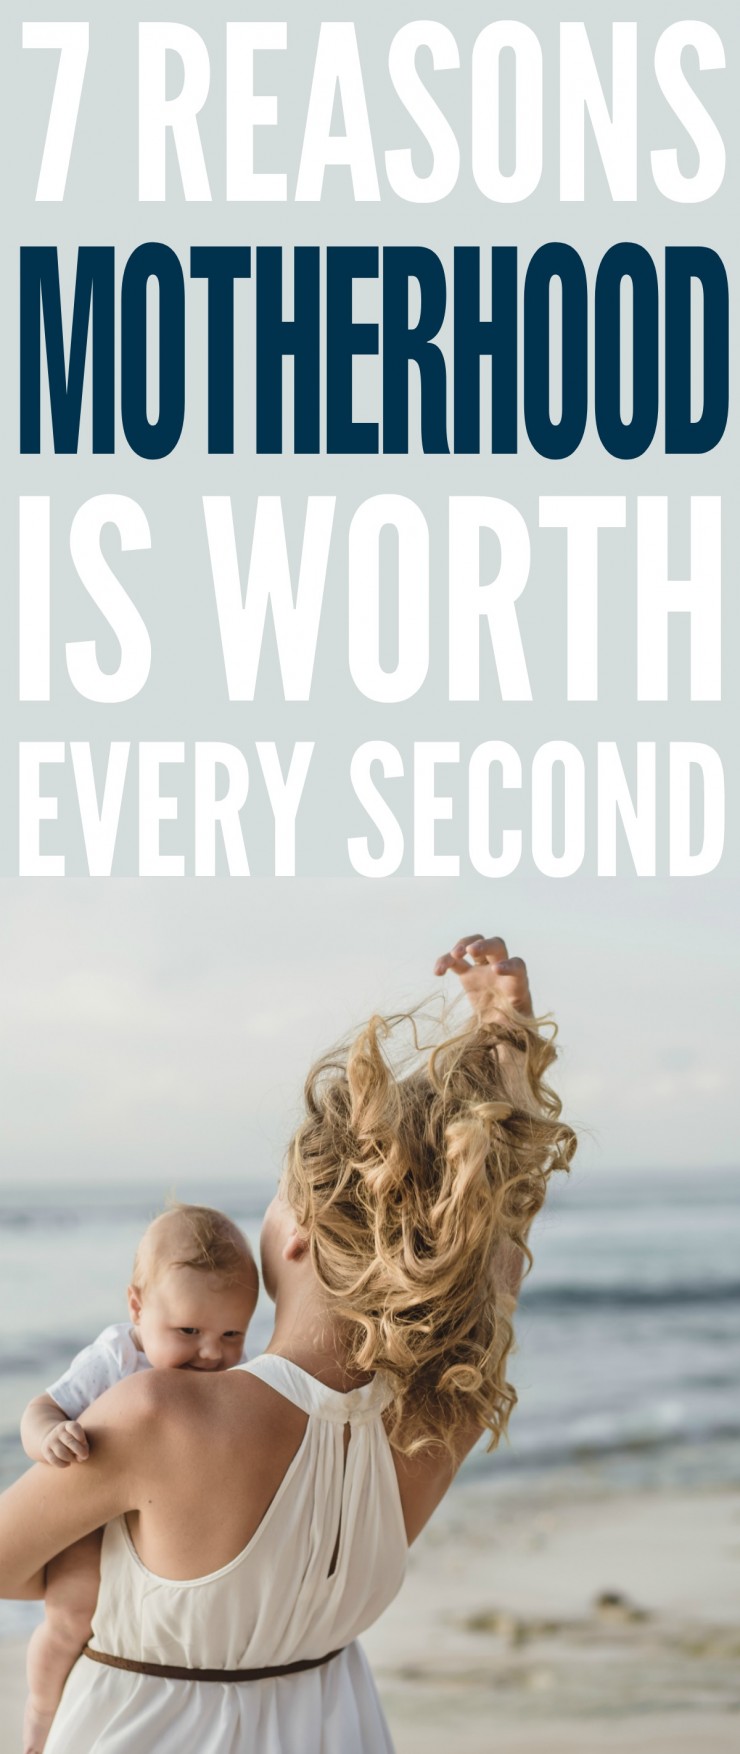 Through the ever-growing laundry list of tasks, duties and responsibilities, being a mom has a beautiful side that makes it worth every single second. 7 Reasons motherhood is worth every second - check it out!